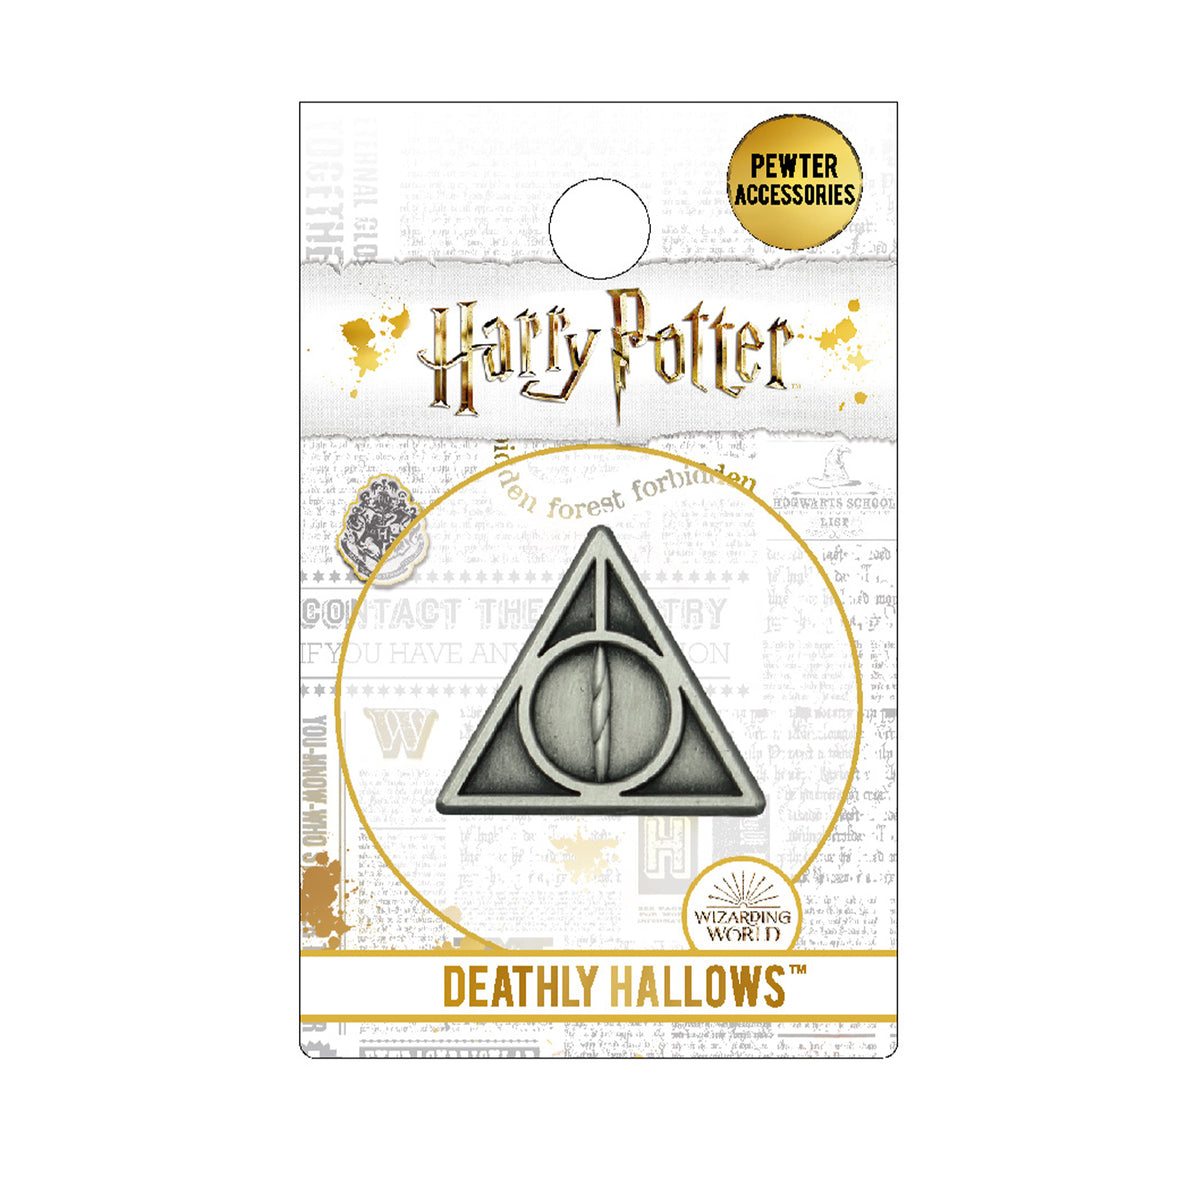 Harry Potter Deathly Hallows Collectible Pin